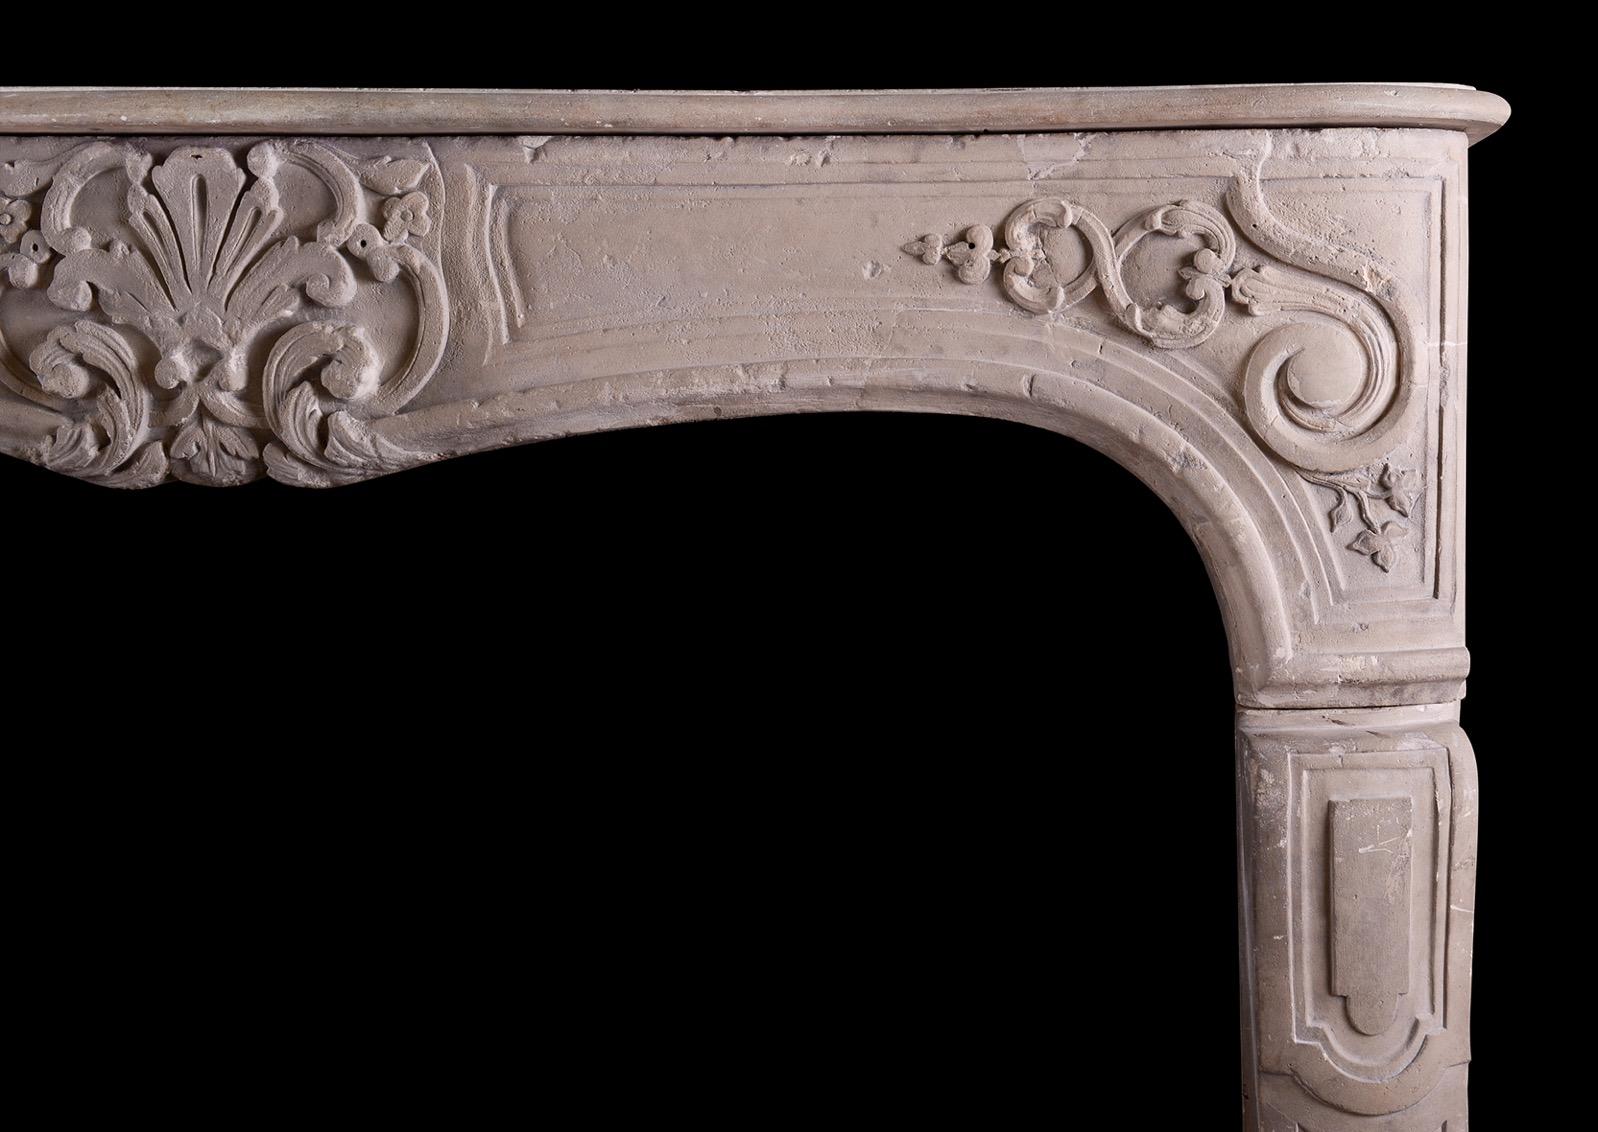 An imposing period Louis XV carved limestone fireplace. The panelling jambs surmounted by shaped frieze carved with scrolls and leaf work to centre. Shaped, moulded shelf above. Still in nicely rustic condition, but could be restored further if